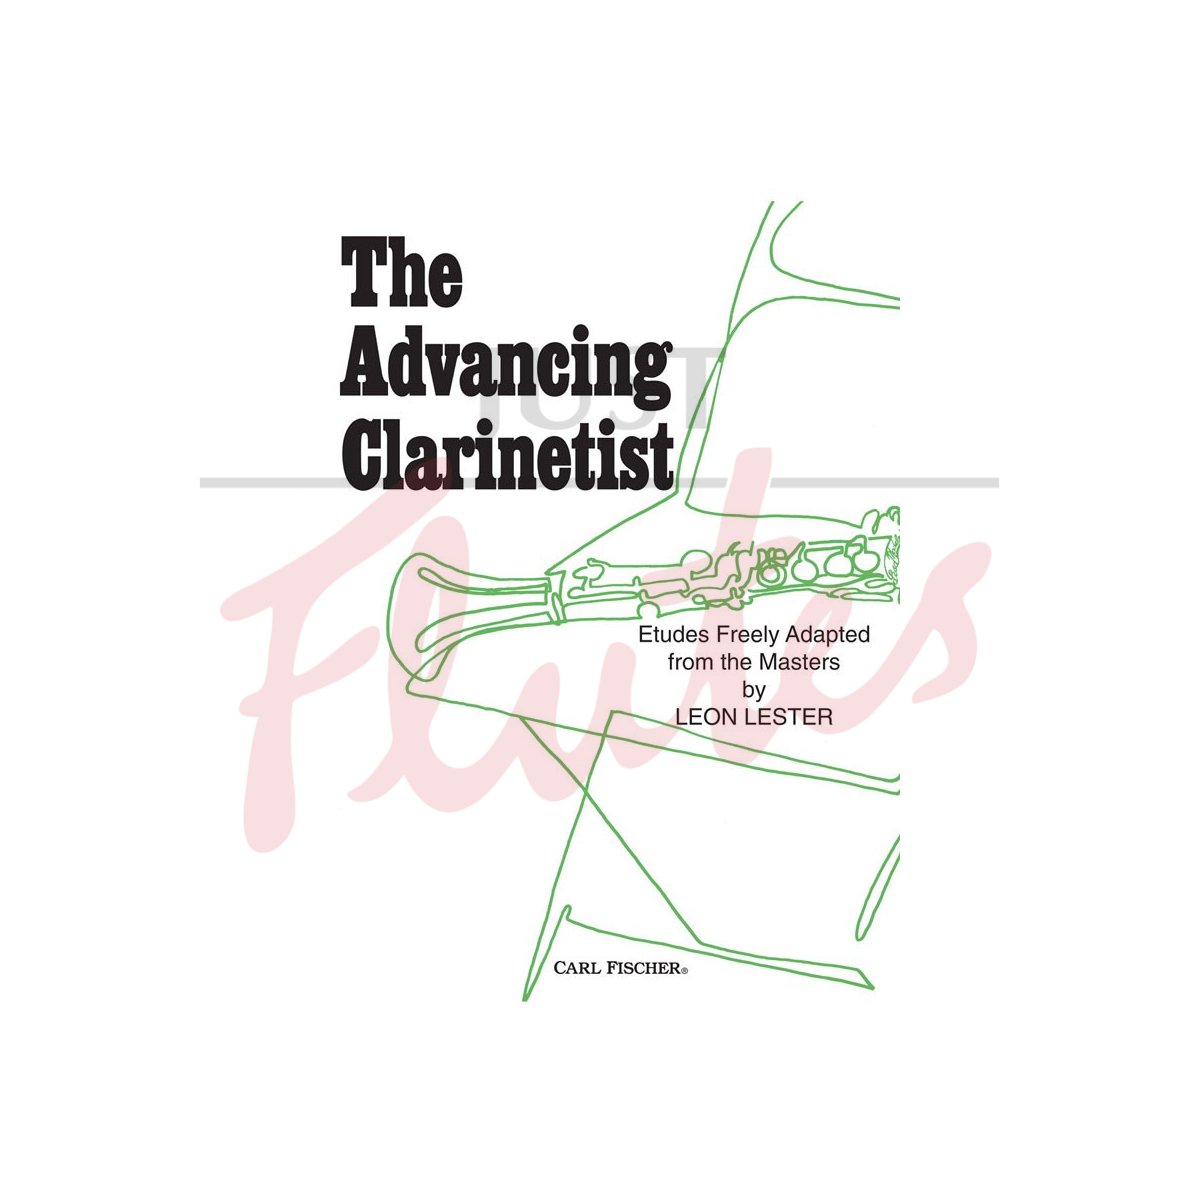 The Advancing Clarinetist - Etudes Freely Adapted from the Masters